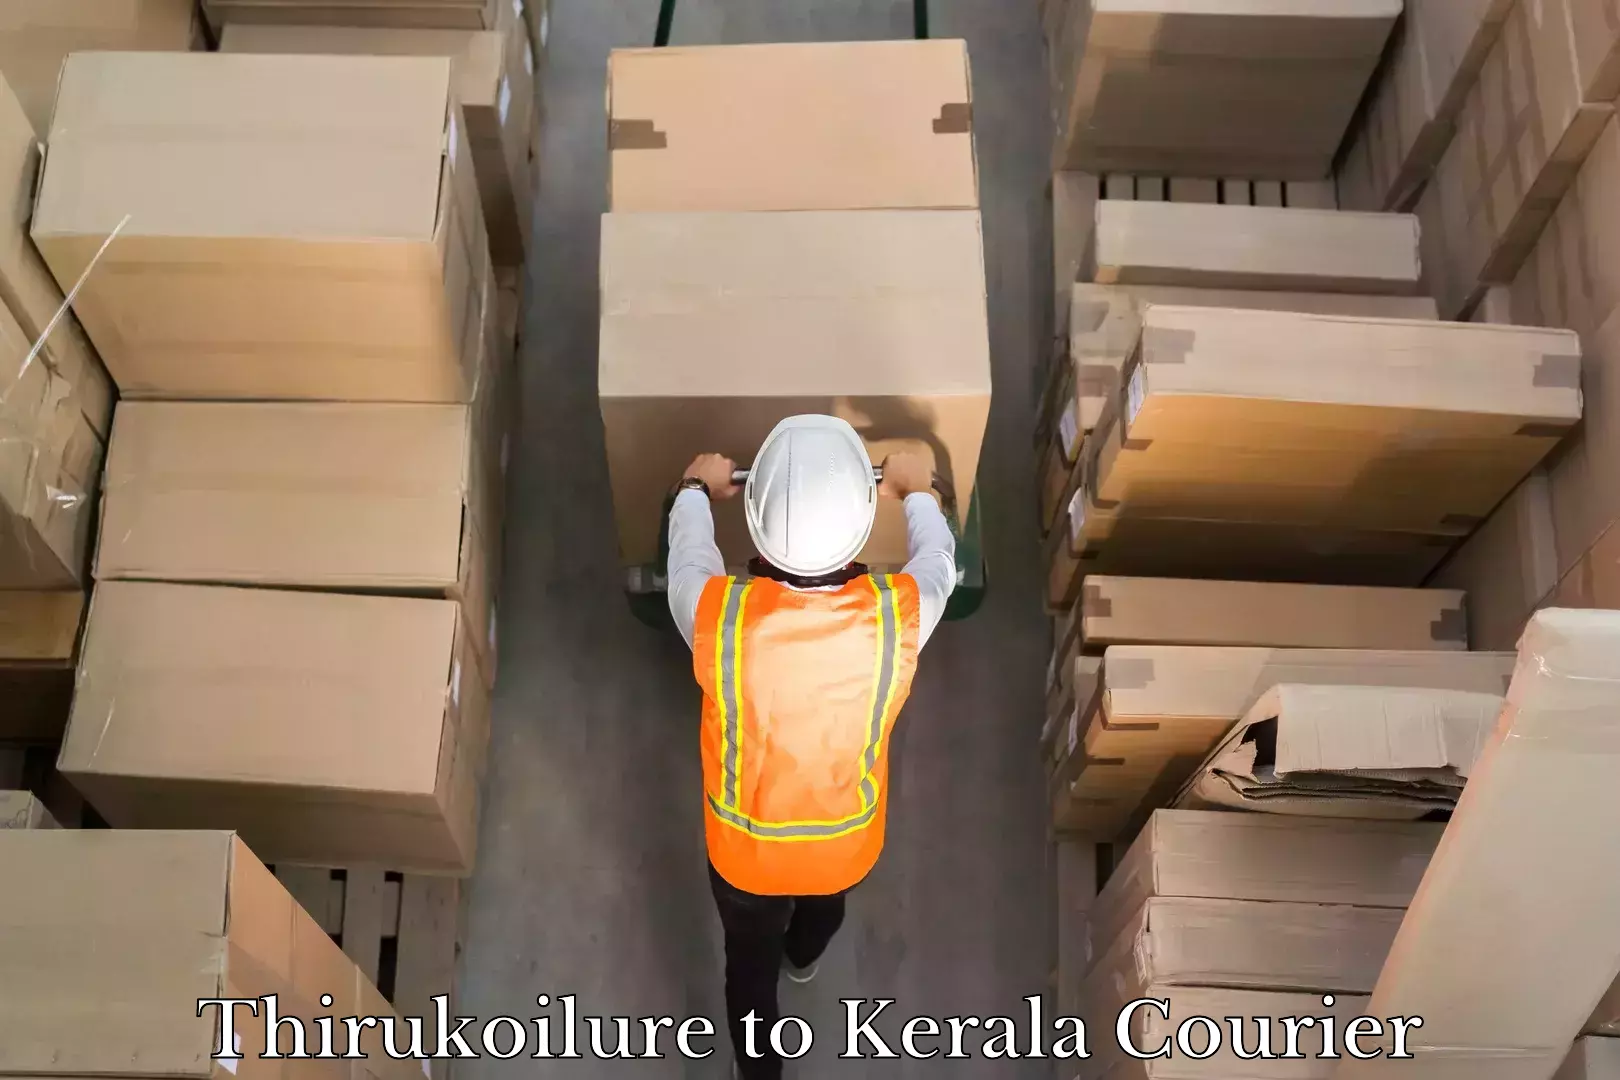 Express delivery solutions Thirukoilure to Kerala